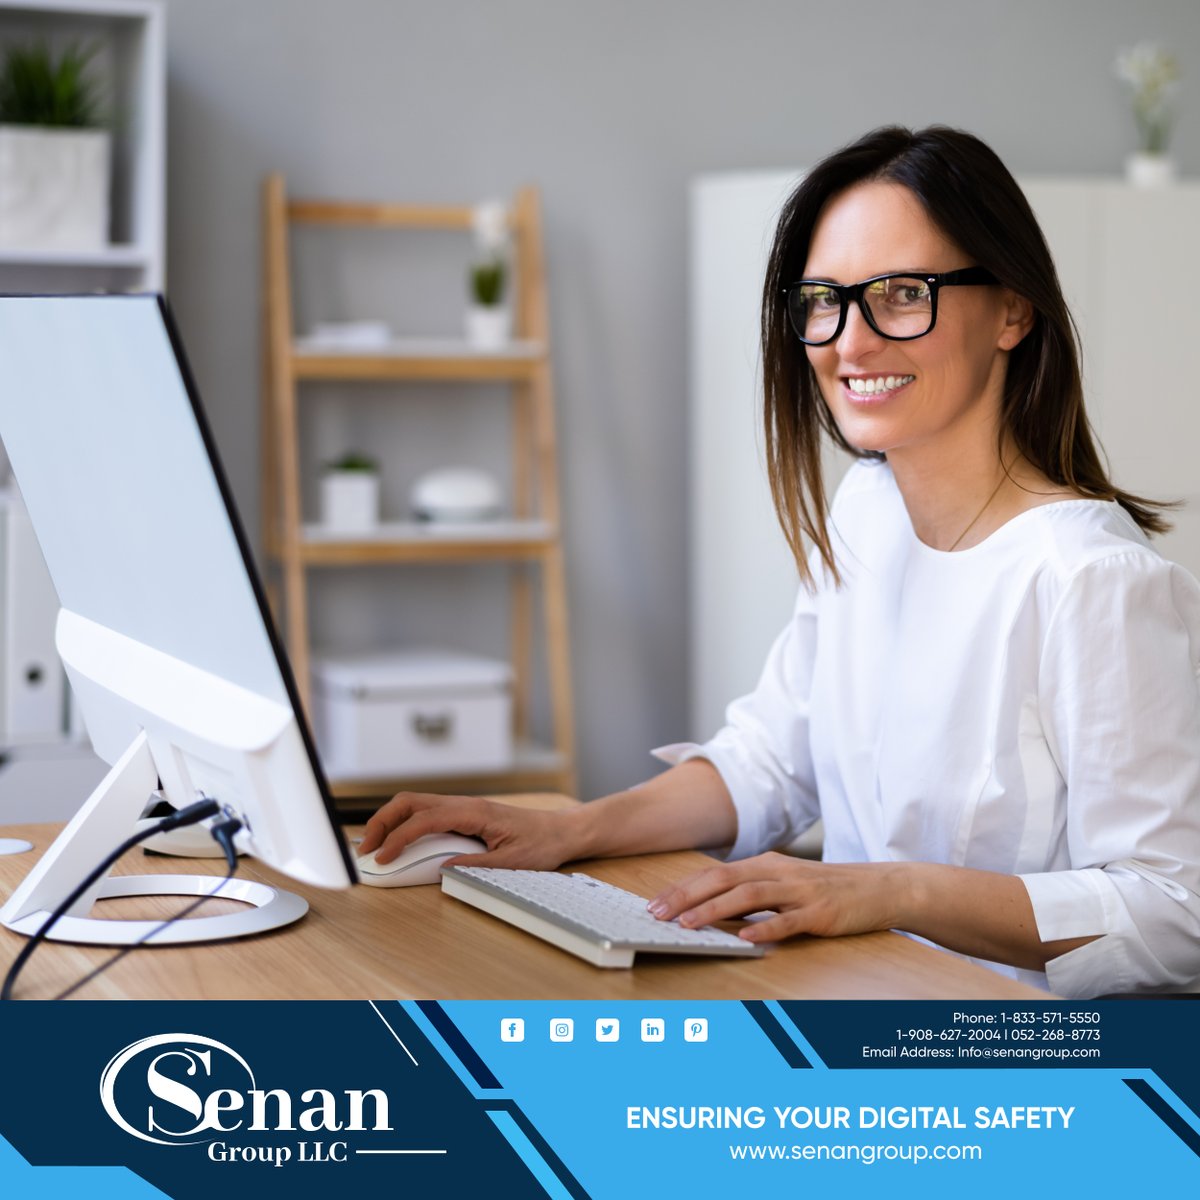 Our Commitment to Better Healthcare

Connected Health is not just a trend; it's a revolution. Discover how Senan Group LLC can assist healthcare professionals in leveraging technology for better patient outcomes and healthcare services.

#BridgewaterNJ #ConnectedHealth